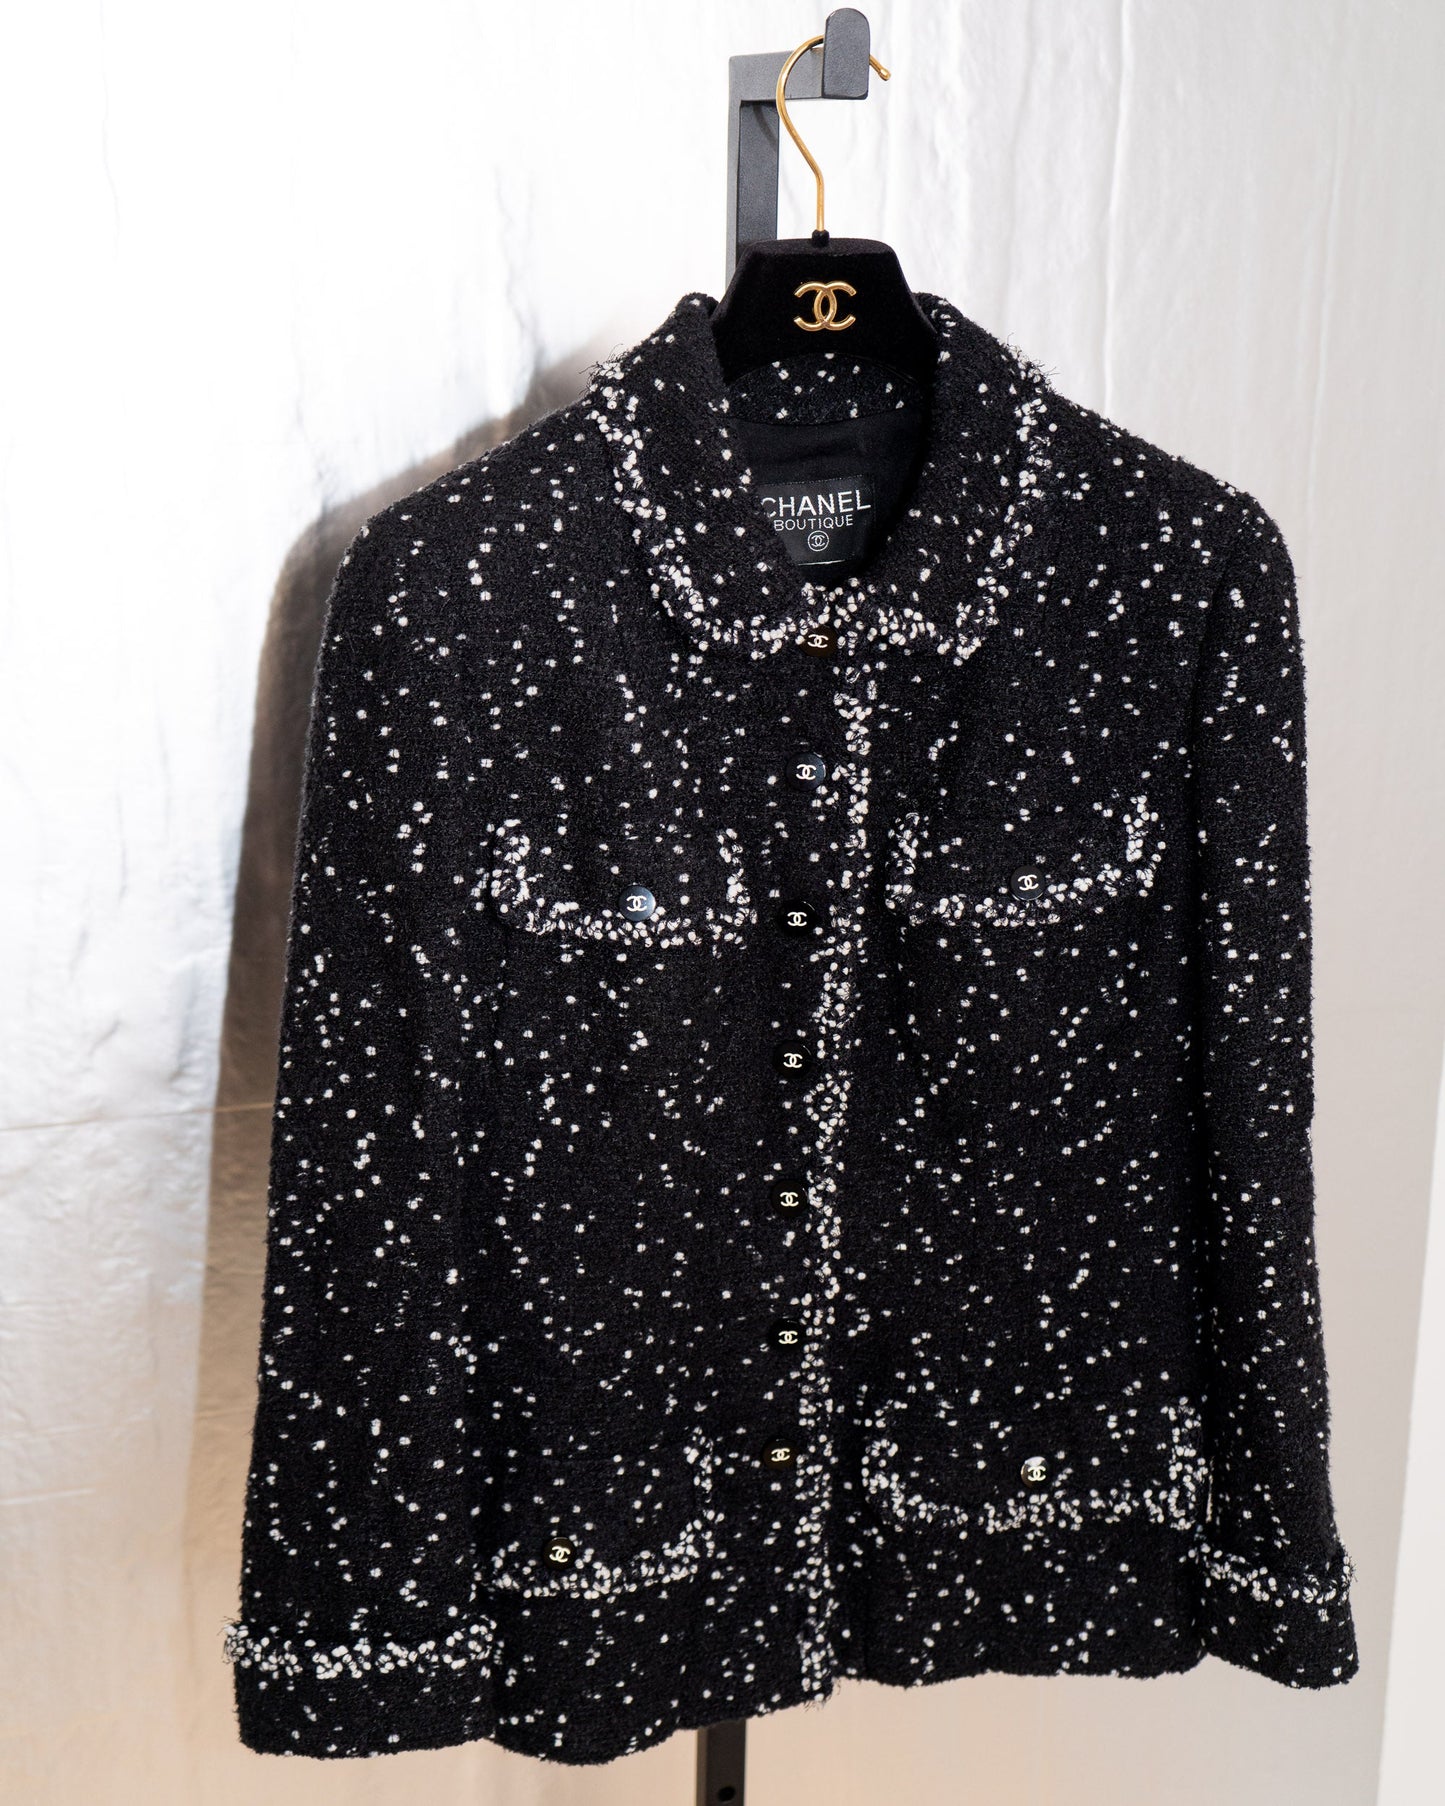 FR44-48 Chanel Fall 1995 Four Pocketed Tweed Boucle Jacket in Black and White